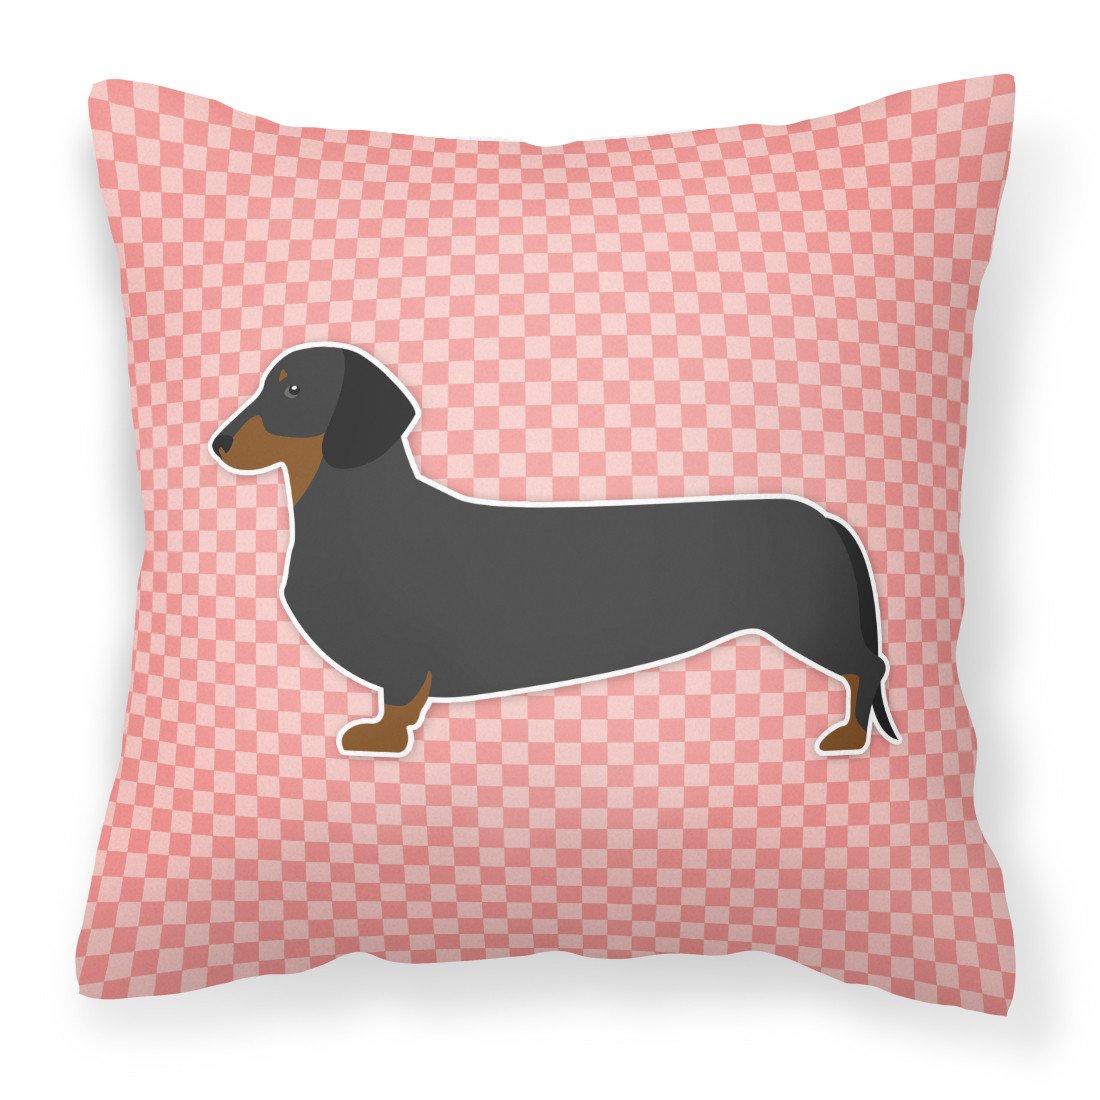 Dachshund Checkerboard Pink Fabric Decorative Pillow BB3582PW1818 by Caroline's Treasures